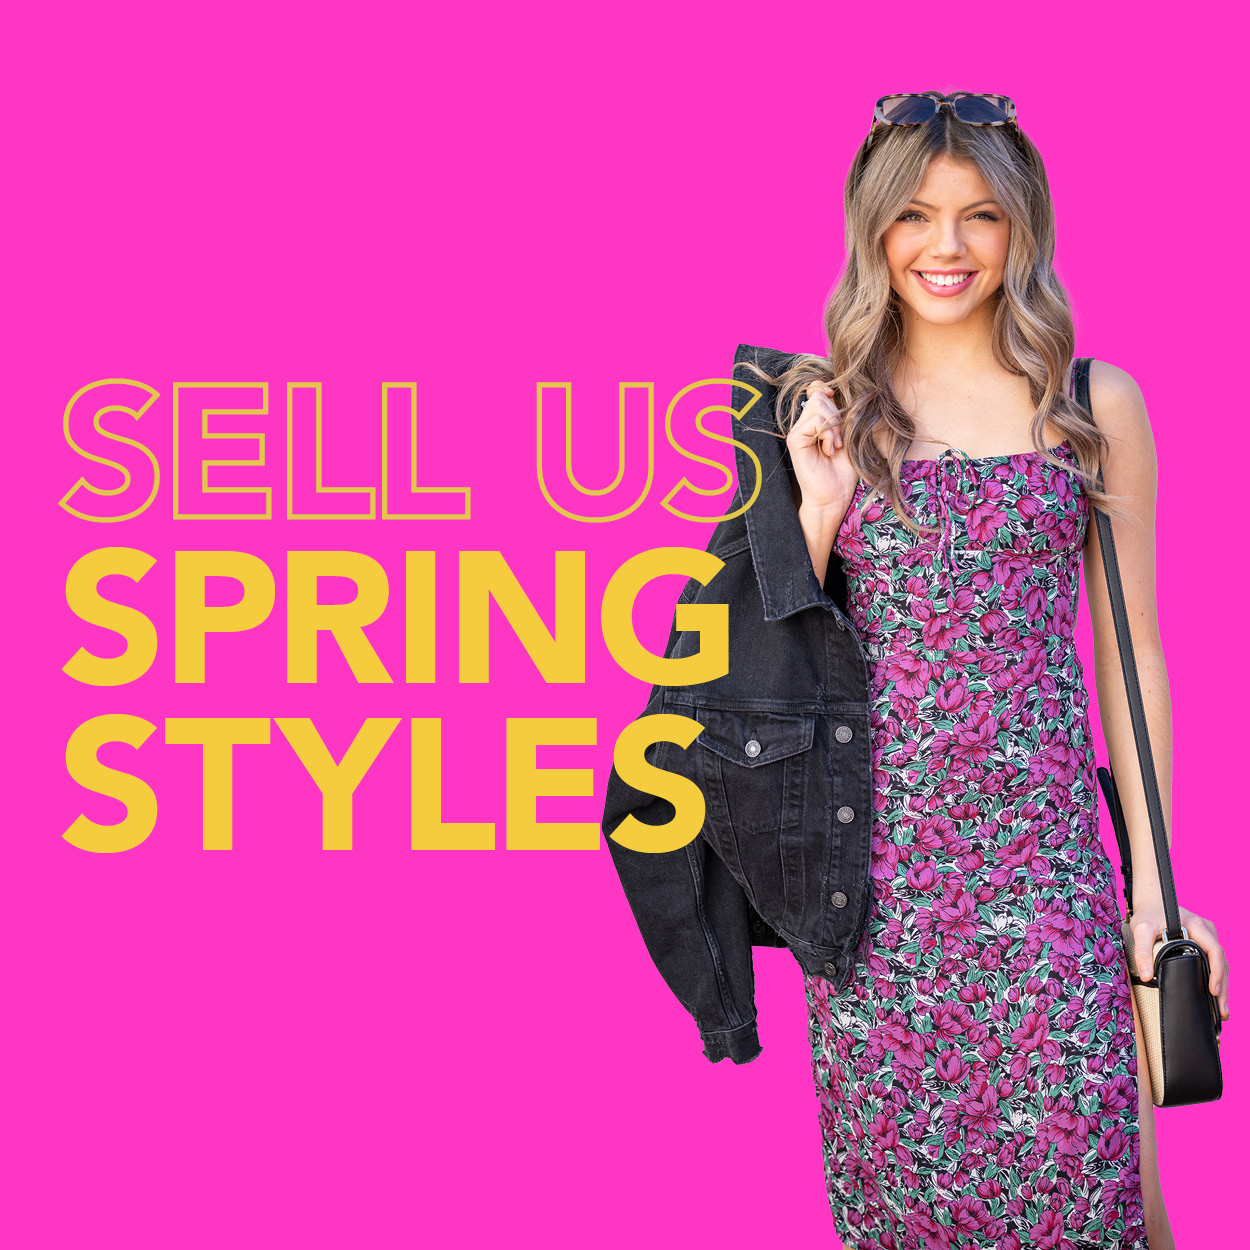 Sell Us Spring Styles